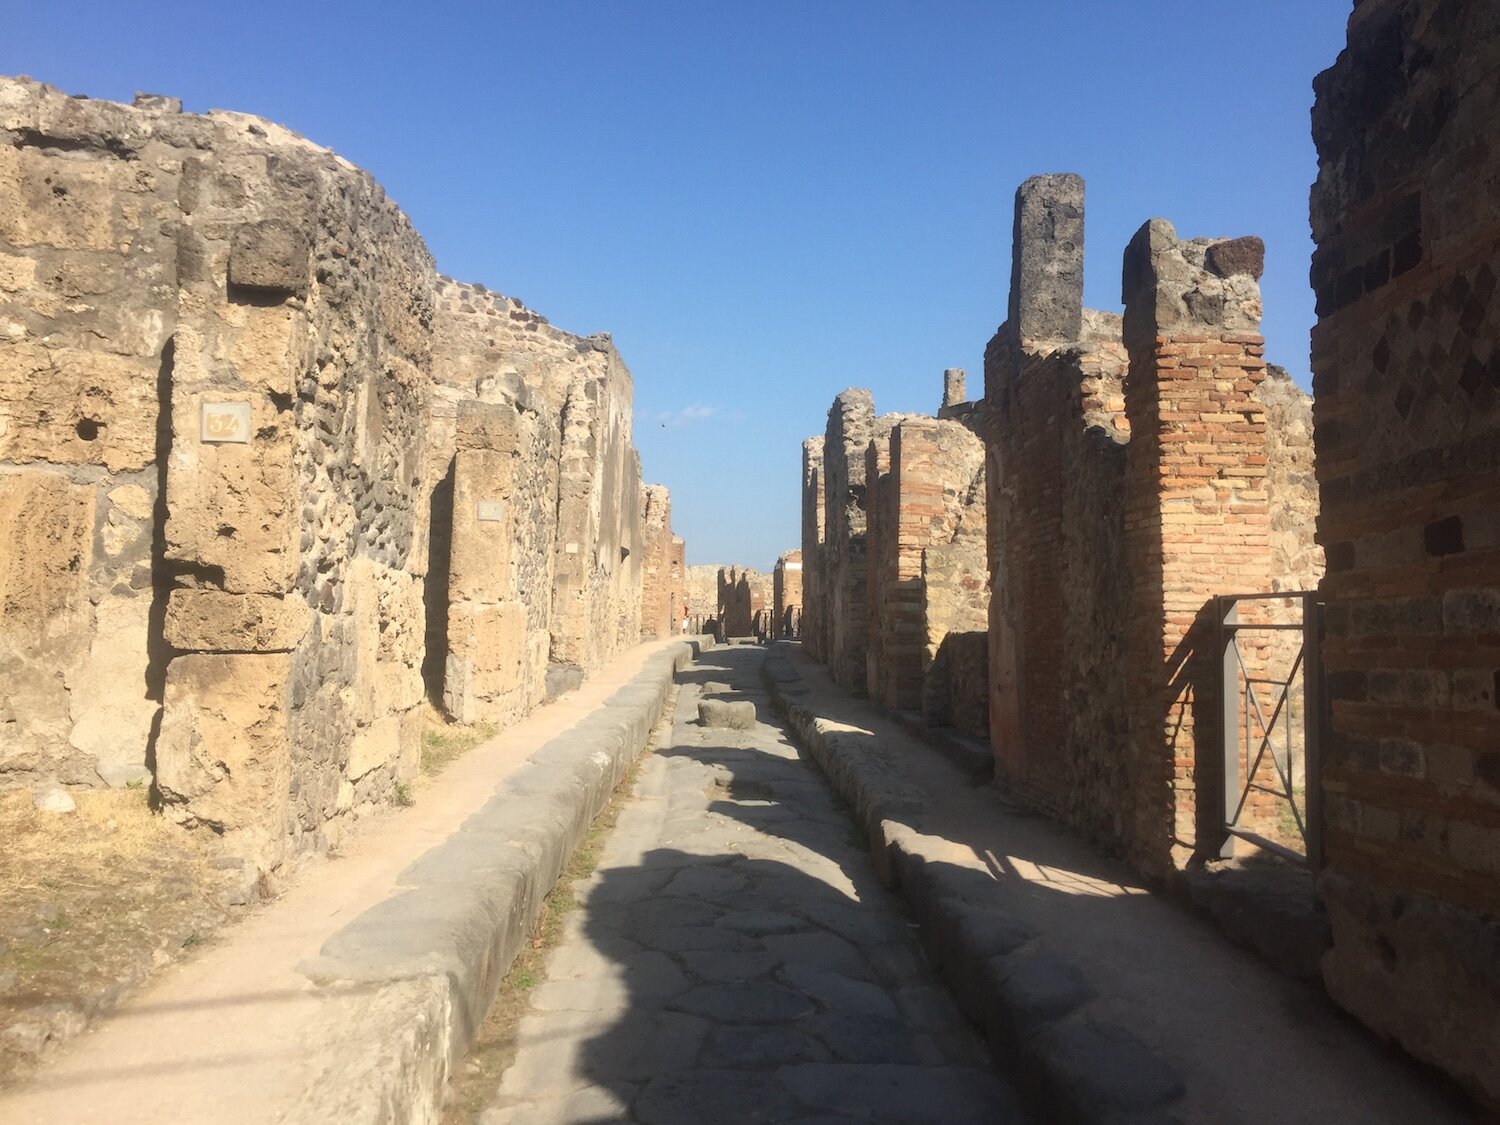 The ancient city of Pompeii had many of the same concepts we're implementing in cities today.